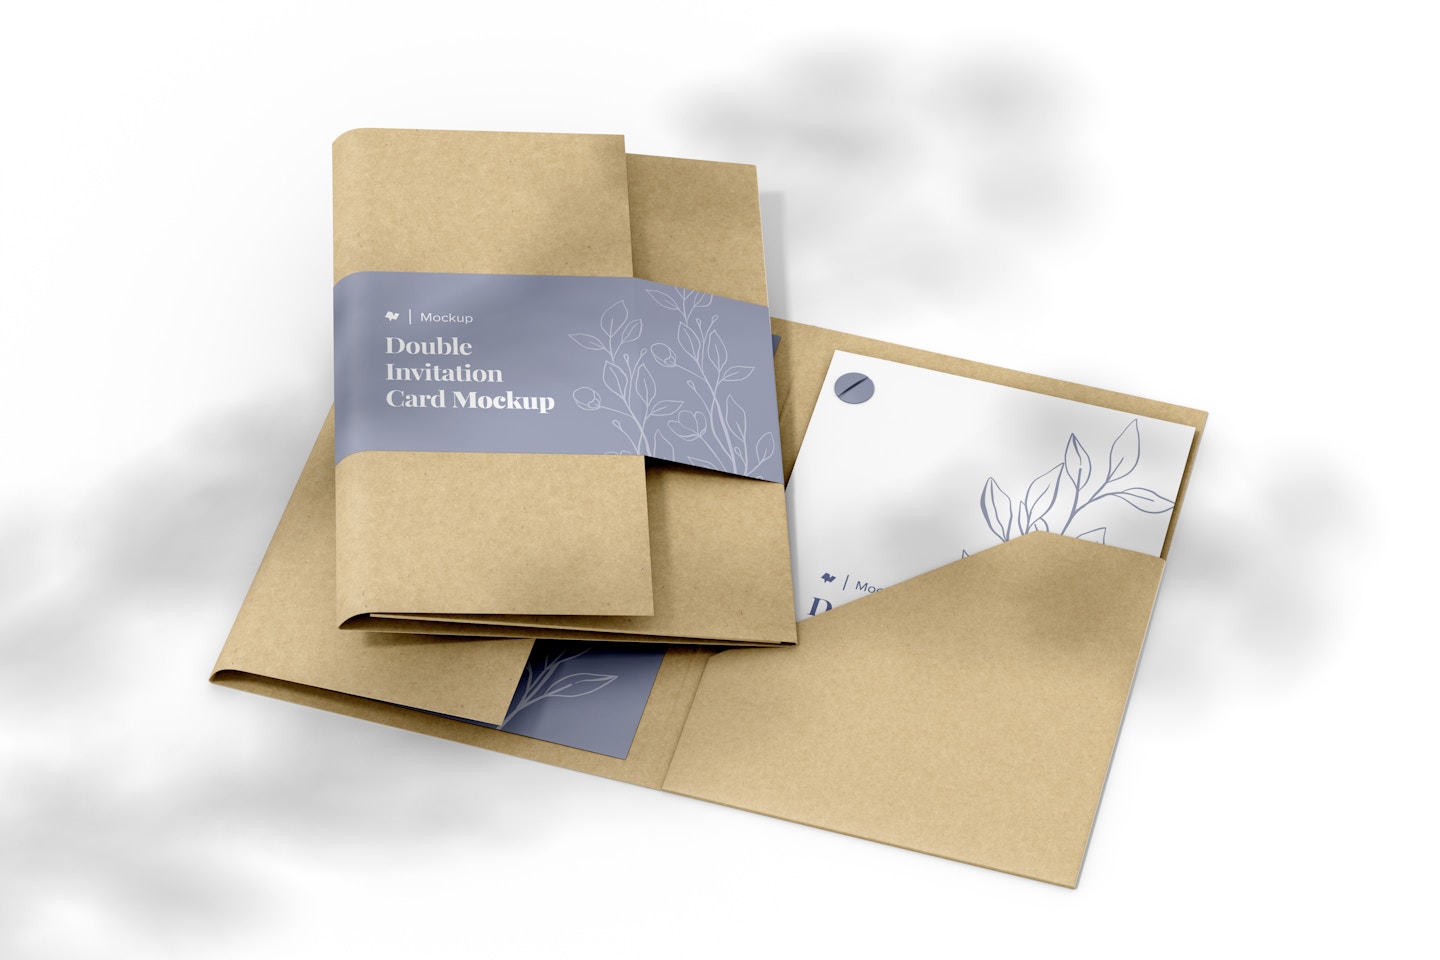 Double Invitation Card Mockup, Opened and Closed